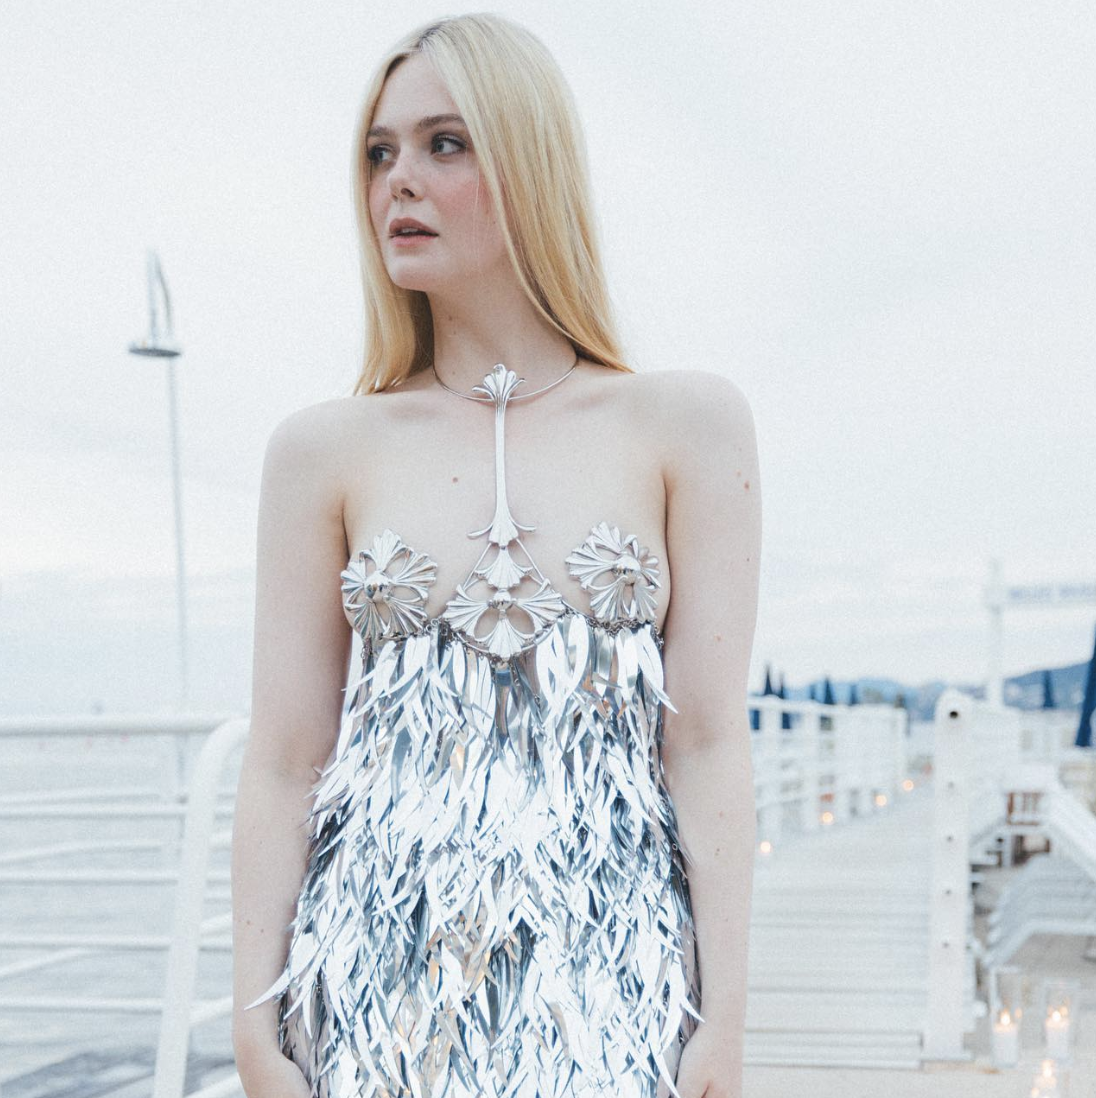 Elle Fanning Tops Cannes Best Dressed Lists in a Dress with Metallic Pasties and Silver Fringe